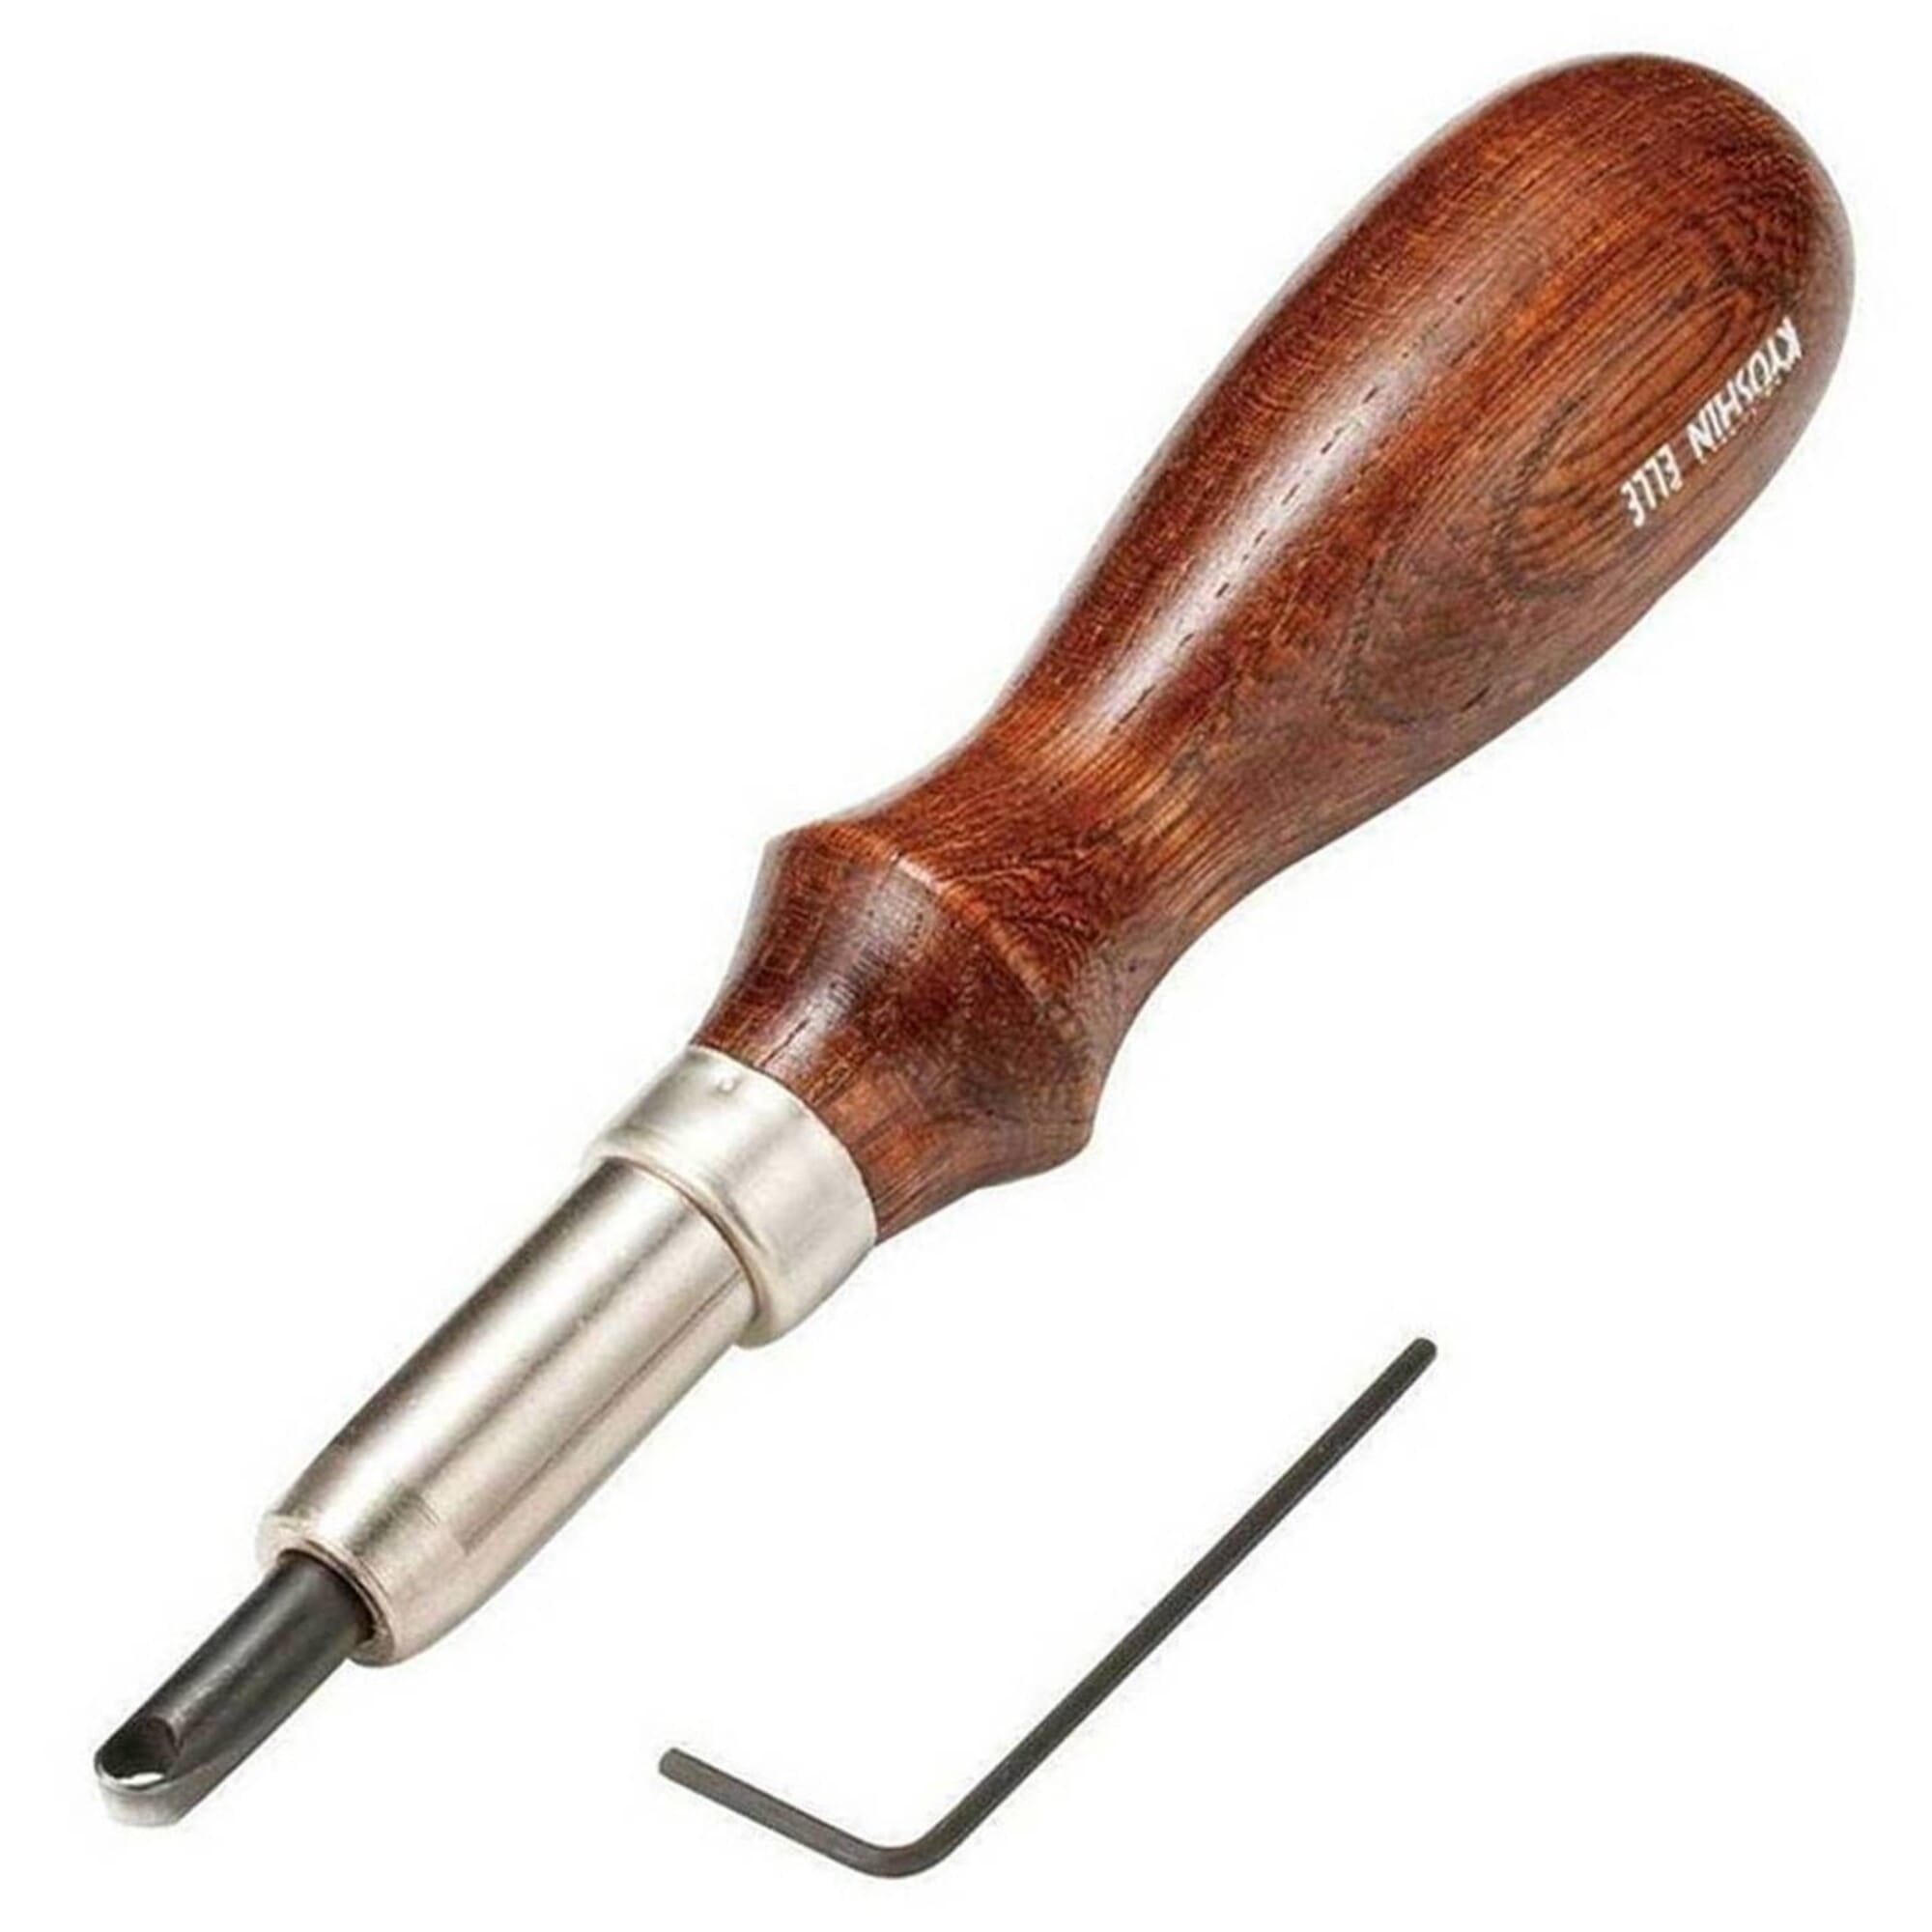 Craft Sha 6oz Leathercraft Rawhide Hammer Jewelers Mallet for Leather Work